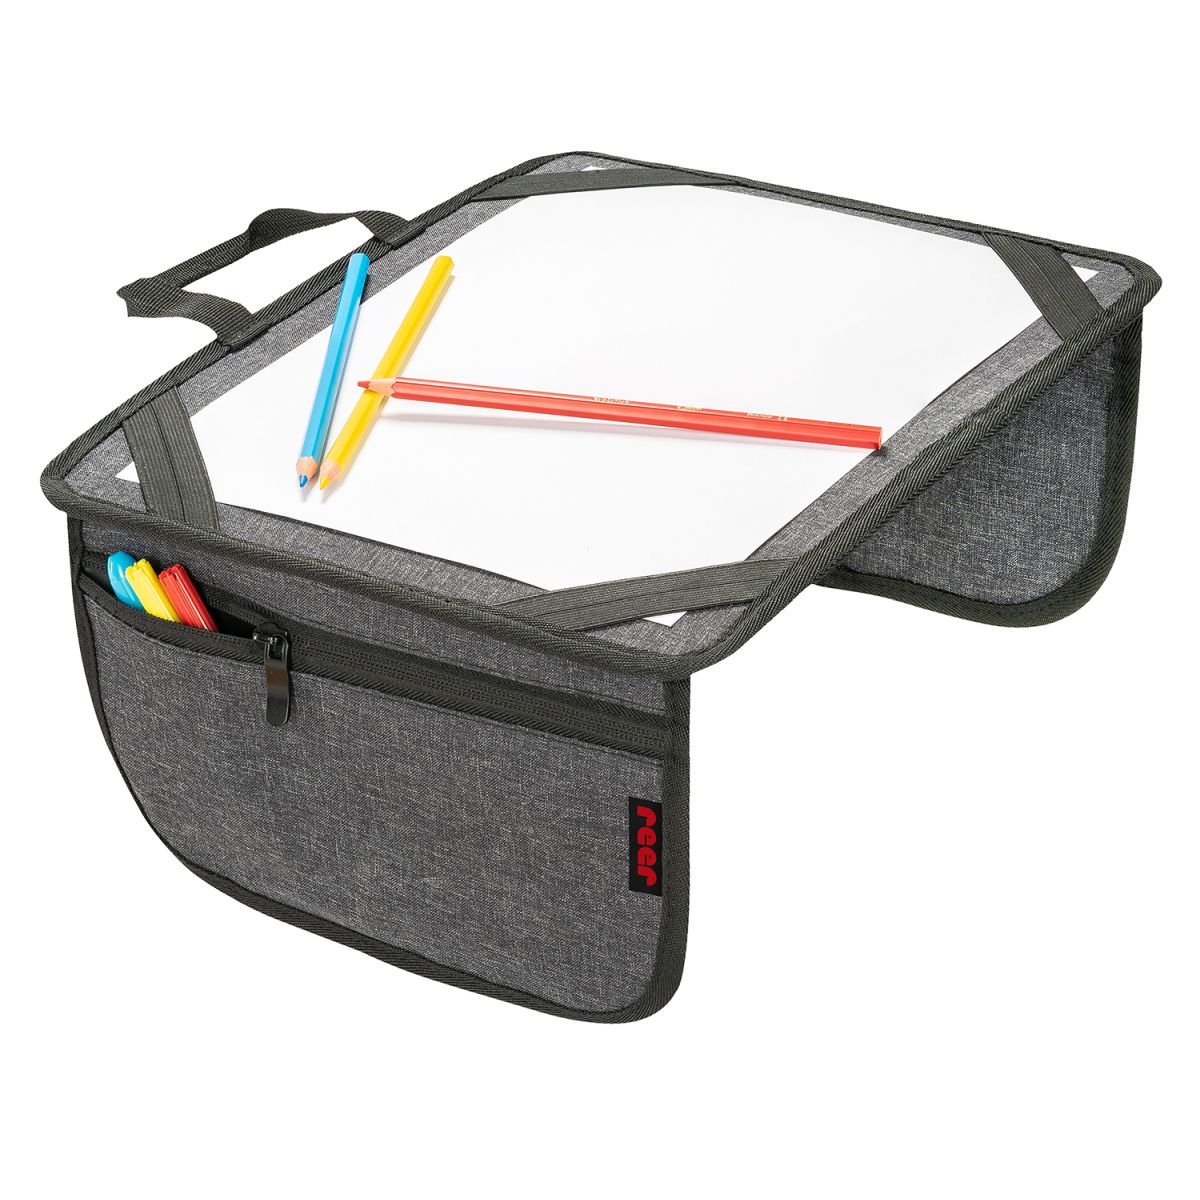 TravelKid Play travel tray